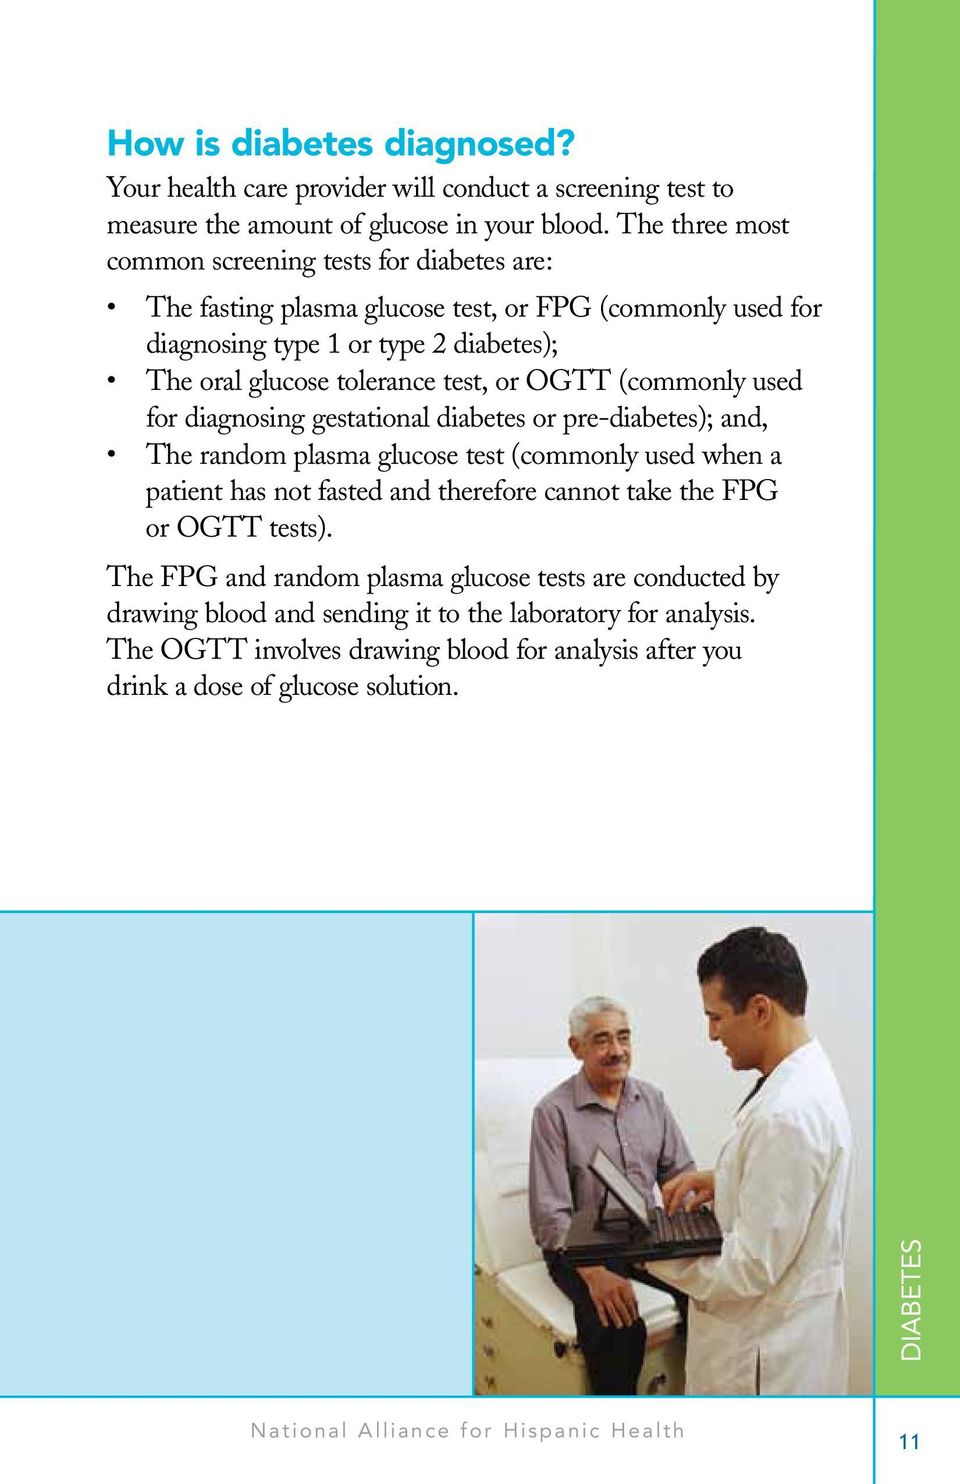 pre-diabetes); and, patient has not fasted and therefore cannot take the FPG The FPG and random plasma glucose tests are conducted by